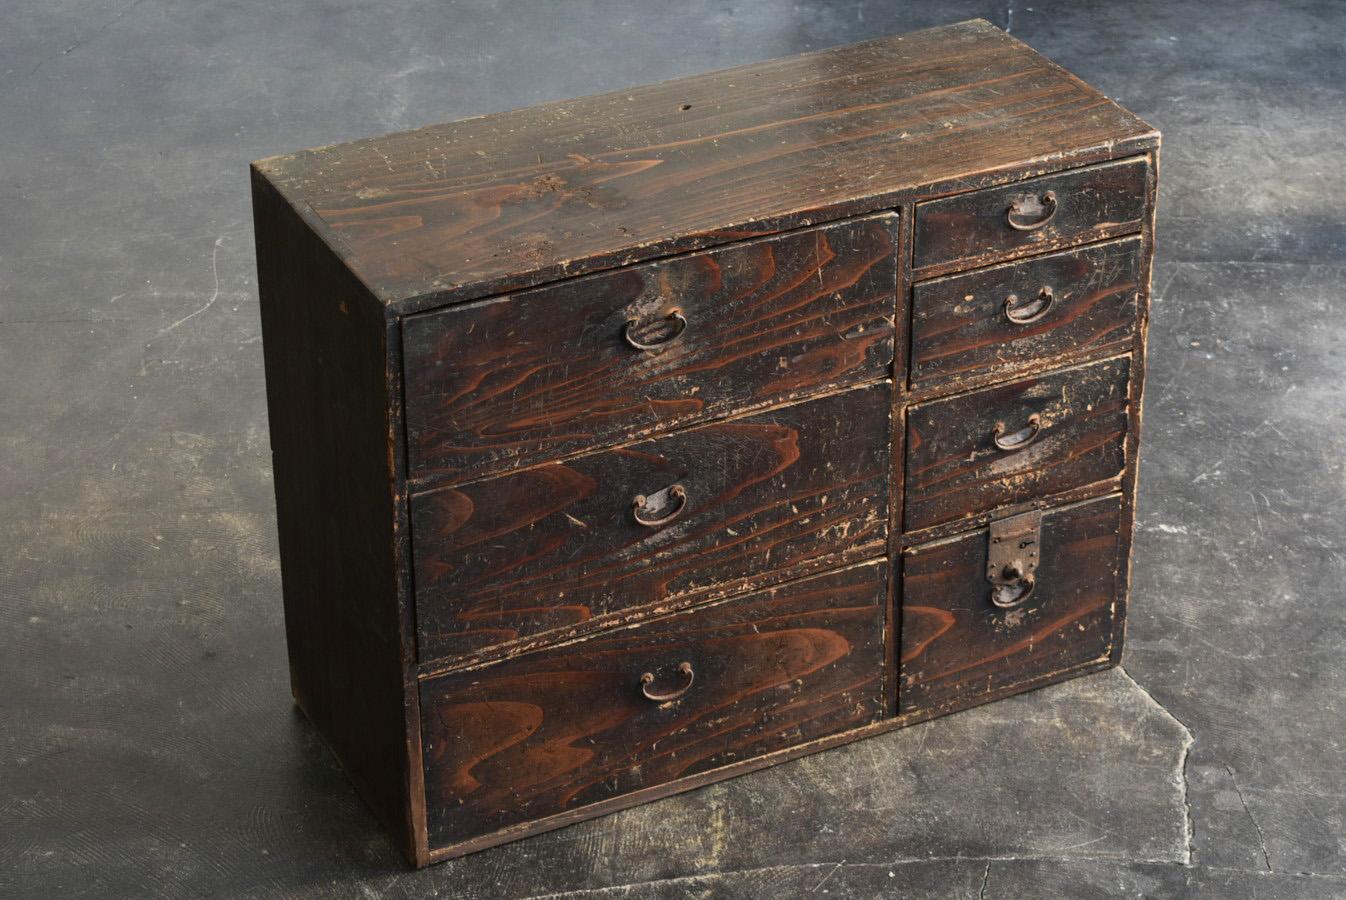 This is an old Japanese wooden drawer made in the late Edo period to around the Meiji period (1800-1900).
The material is made of cedar, and the unique wood grain is very beautiful.
The handle is made of iron.

The metal fittings are rustic and